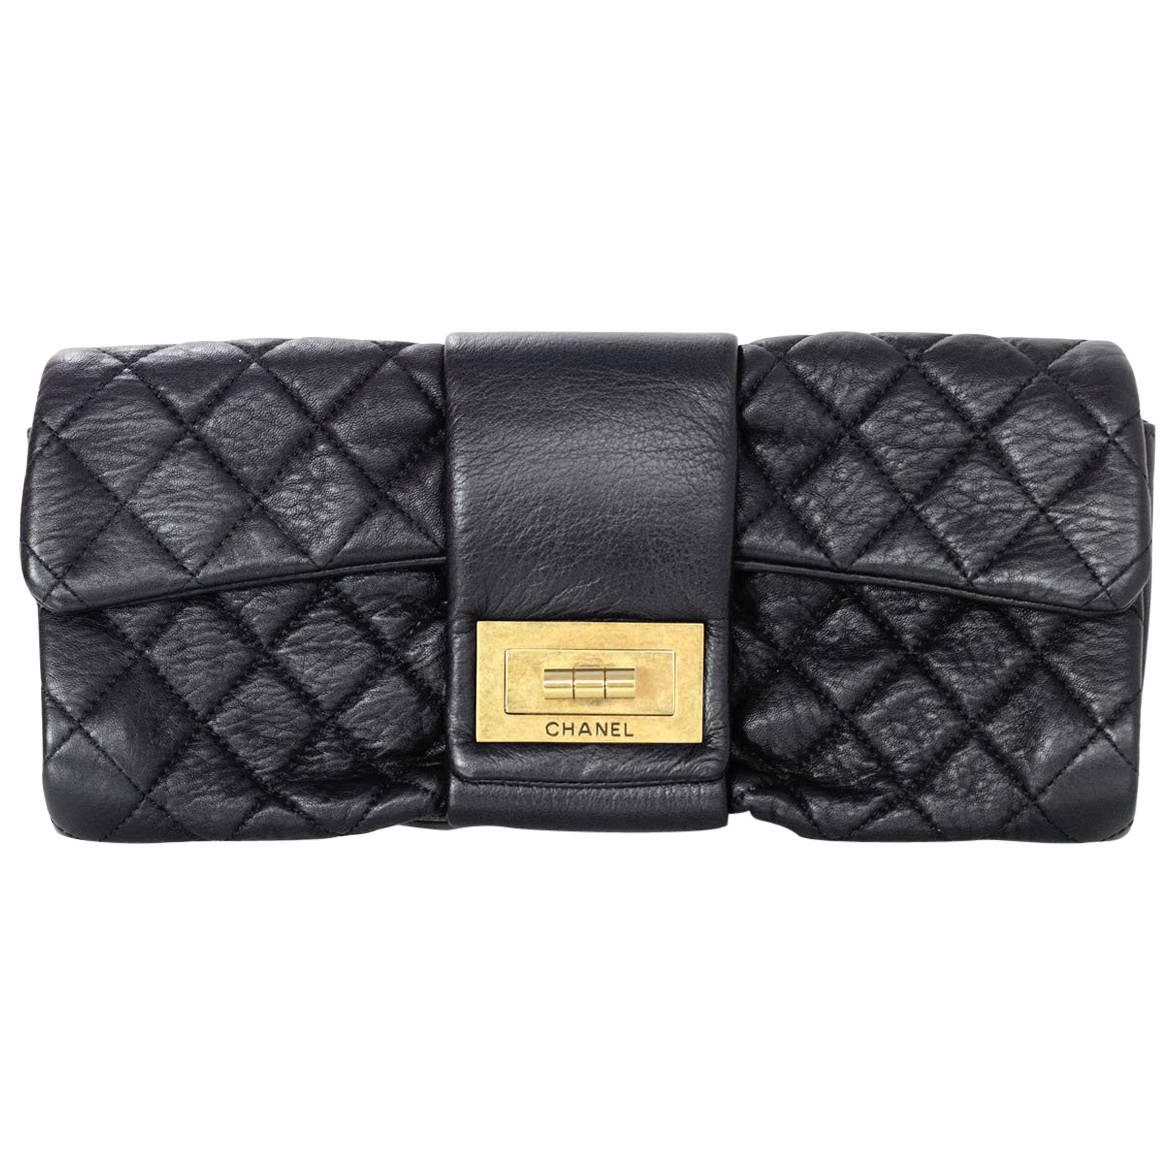 Chanel Black Quilted Leather 2.55 Reissue Clutch Bag